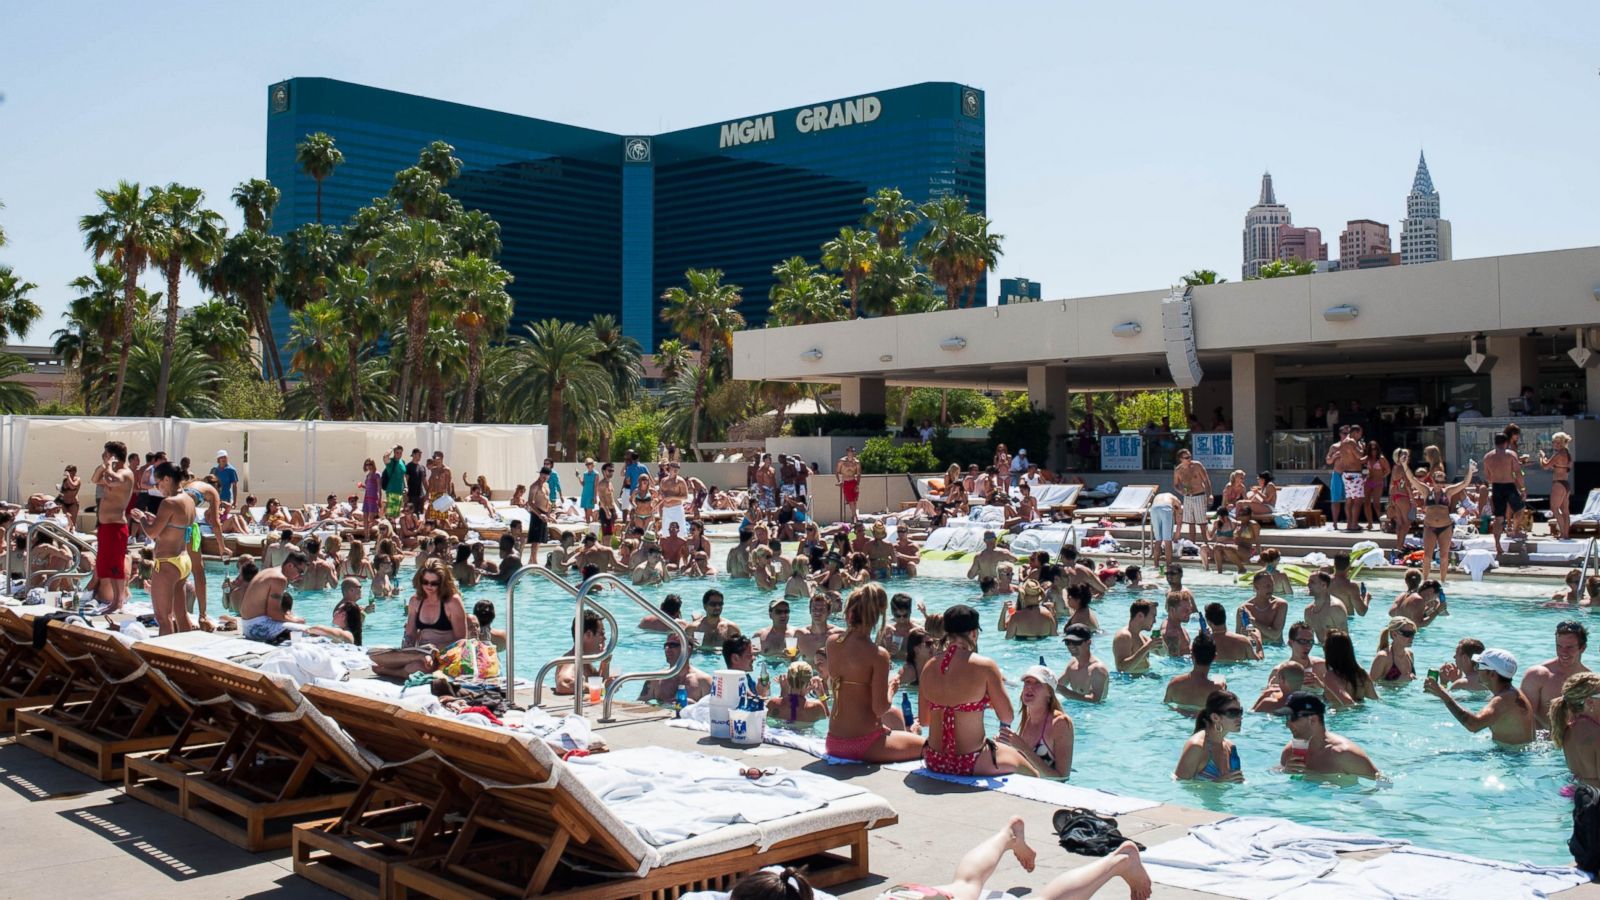 A Complete List Of All Las Vegas Pools & Pool Parties